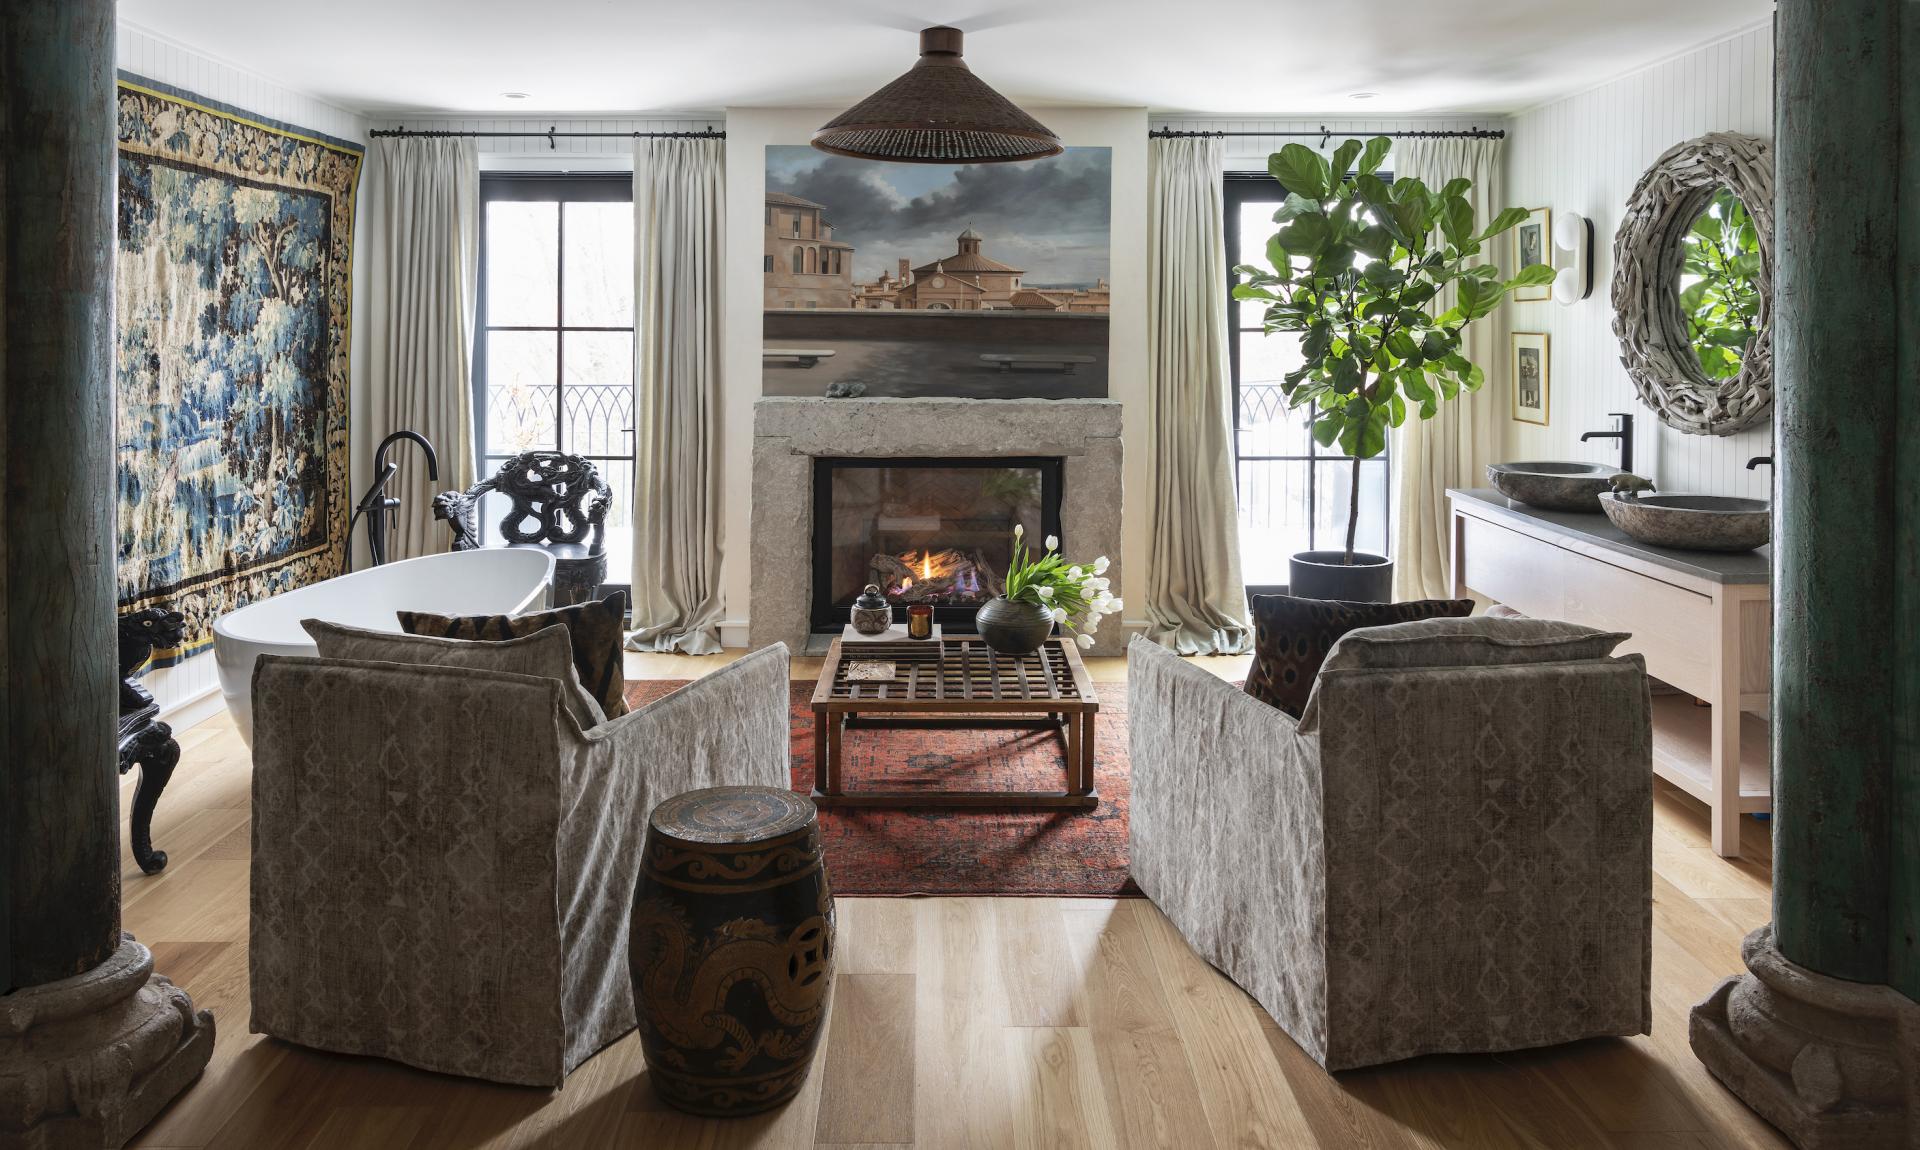 Interior designer Henrietta Southam's 2,800 sq ft Tribal Chic Home for Her Blended Family in Canada